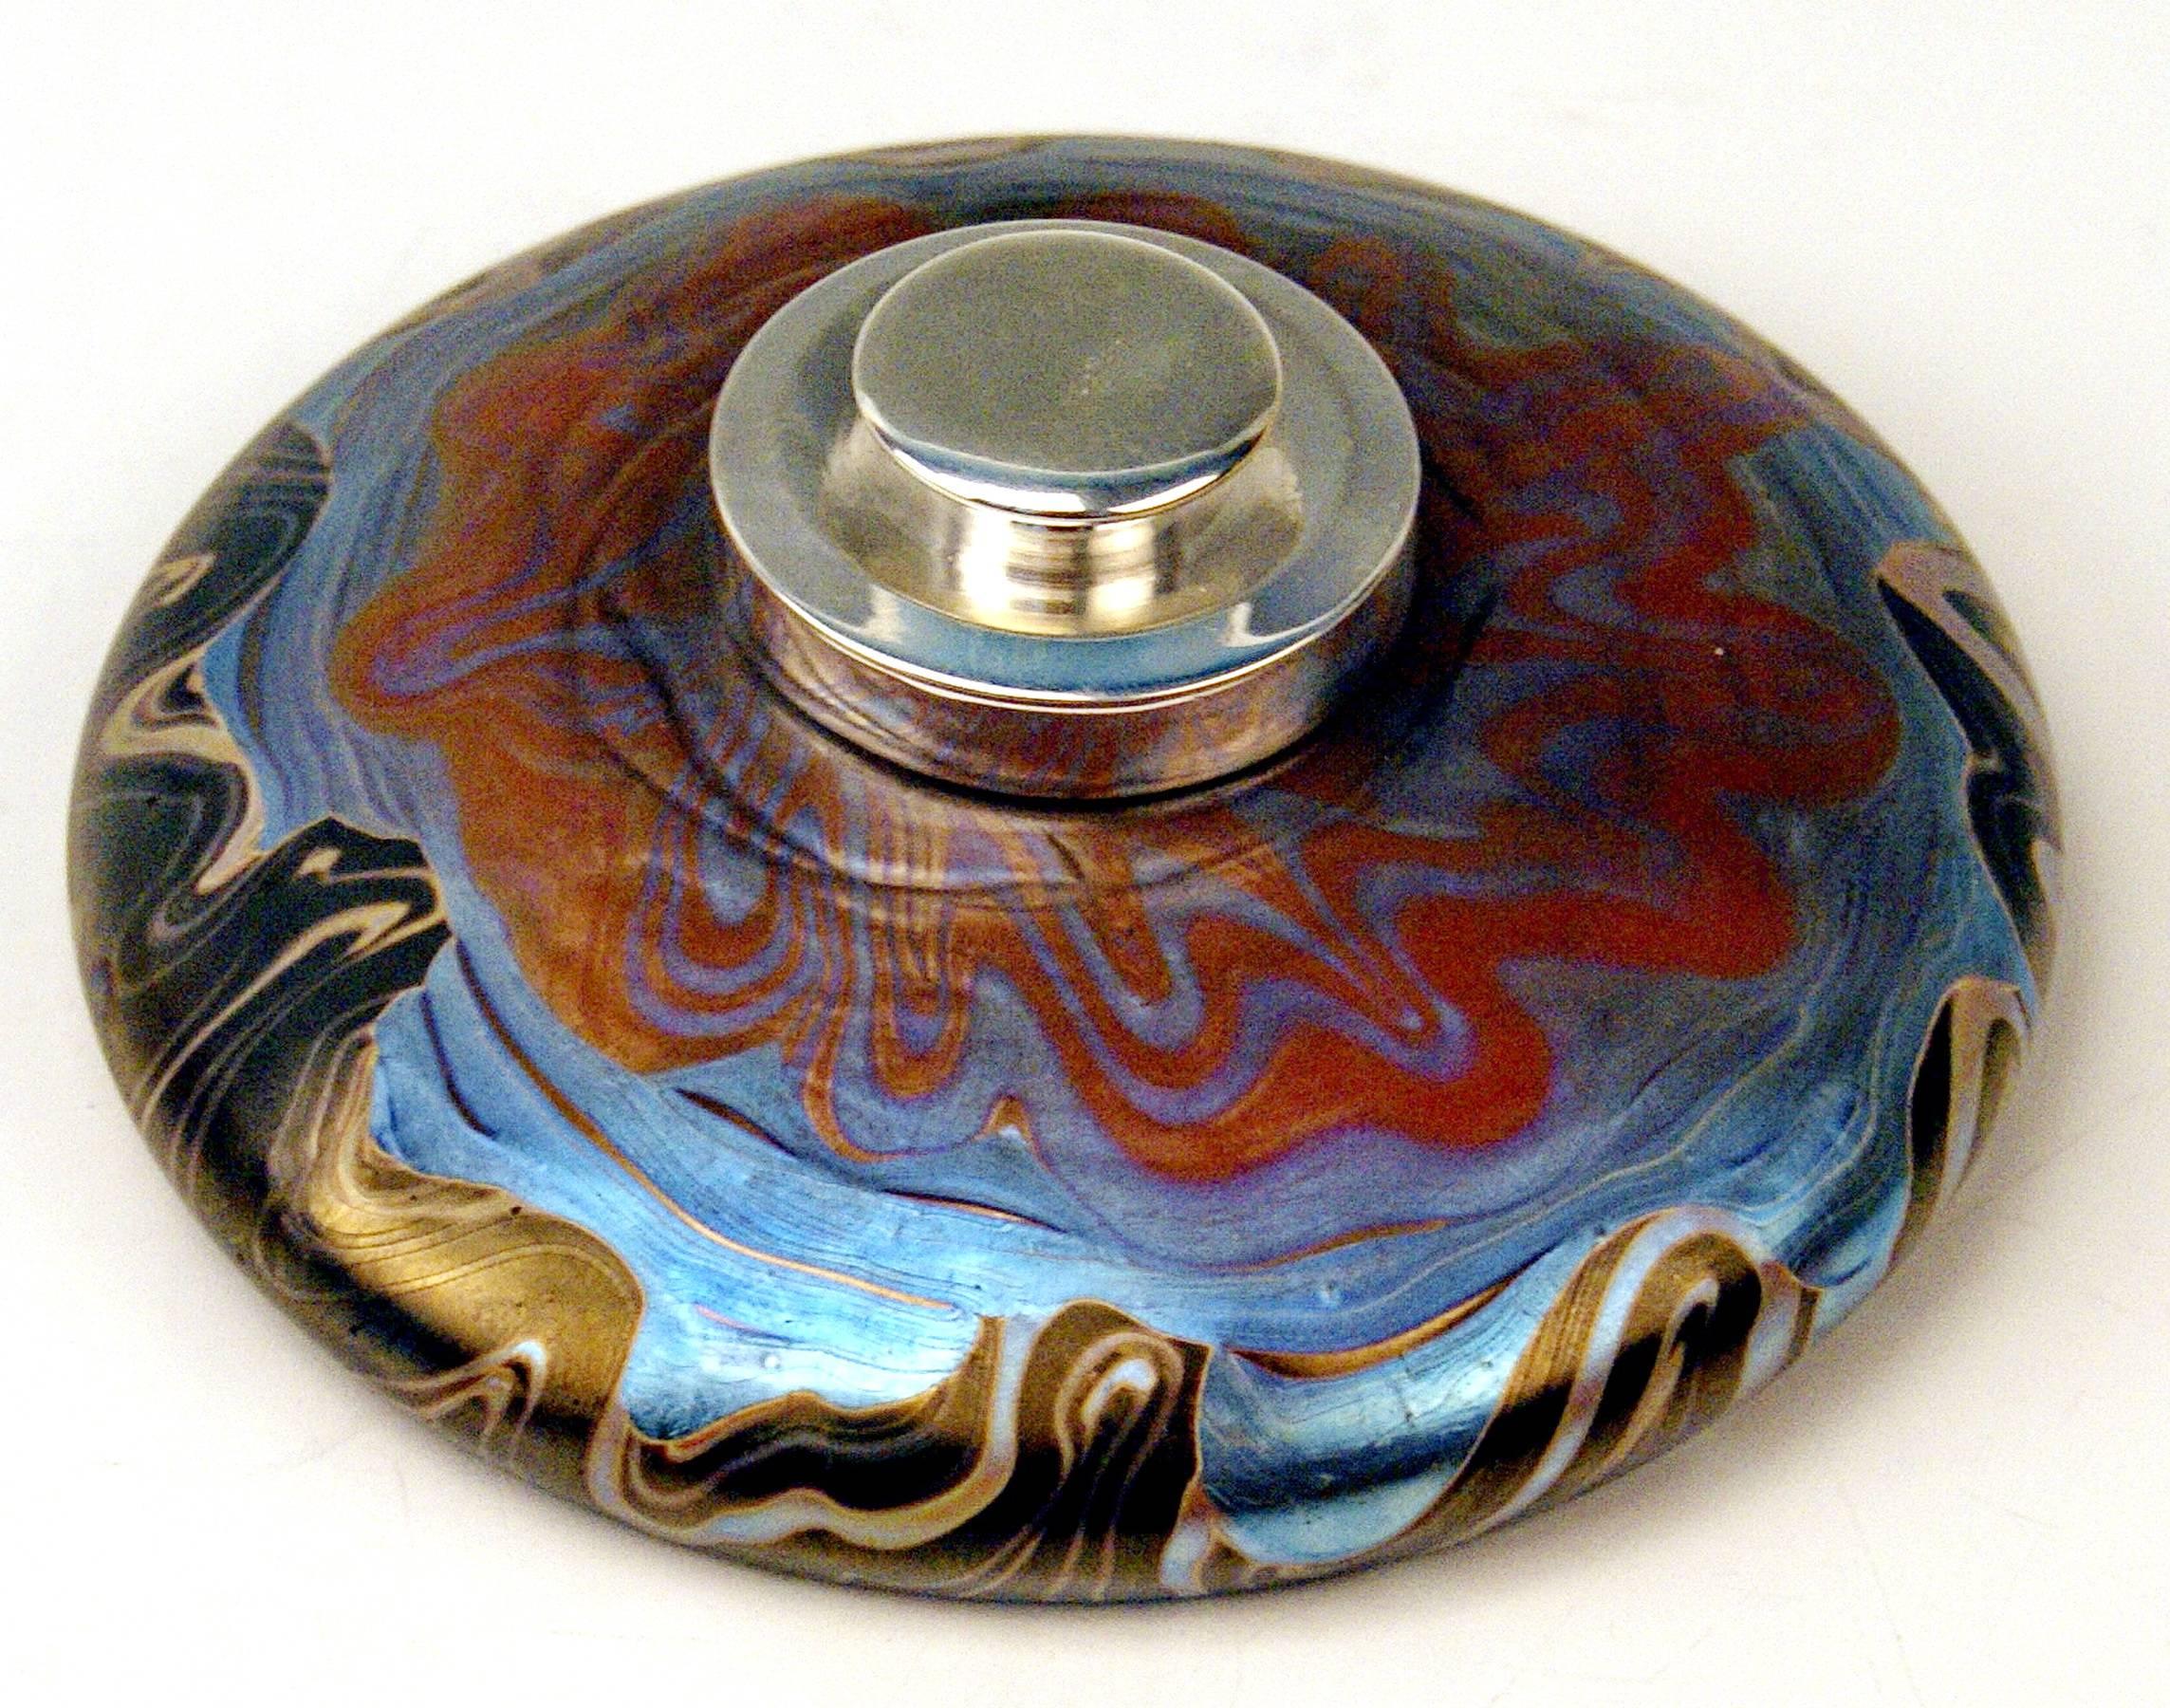 Gorgeous inkstand, inkpot or inkwell Loetz Widow Art Nouveau. 

Made by Loetz / Klostermuehle (Bohemia / Old Imperial Austria), circa 1901.
Decor: Phaenomen Gre 358 / Form 85-3930 / Glass shaded in different colors.

Stunning and rarest Decor